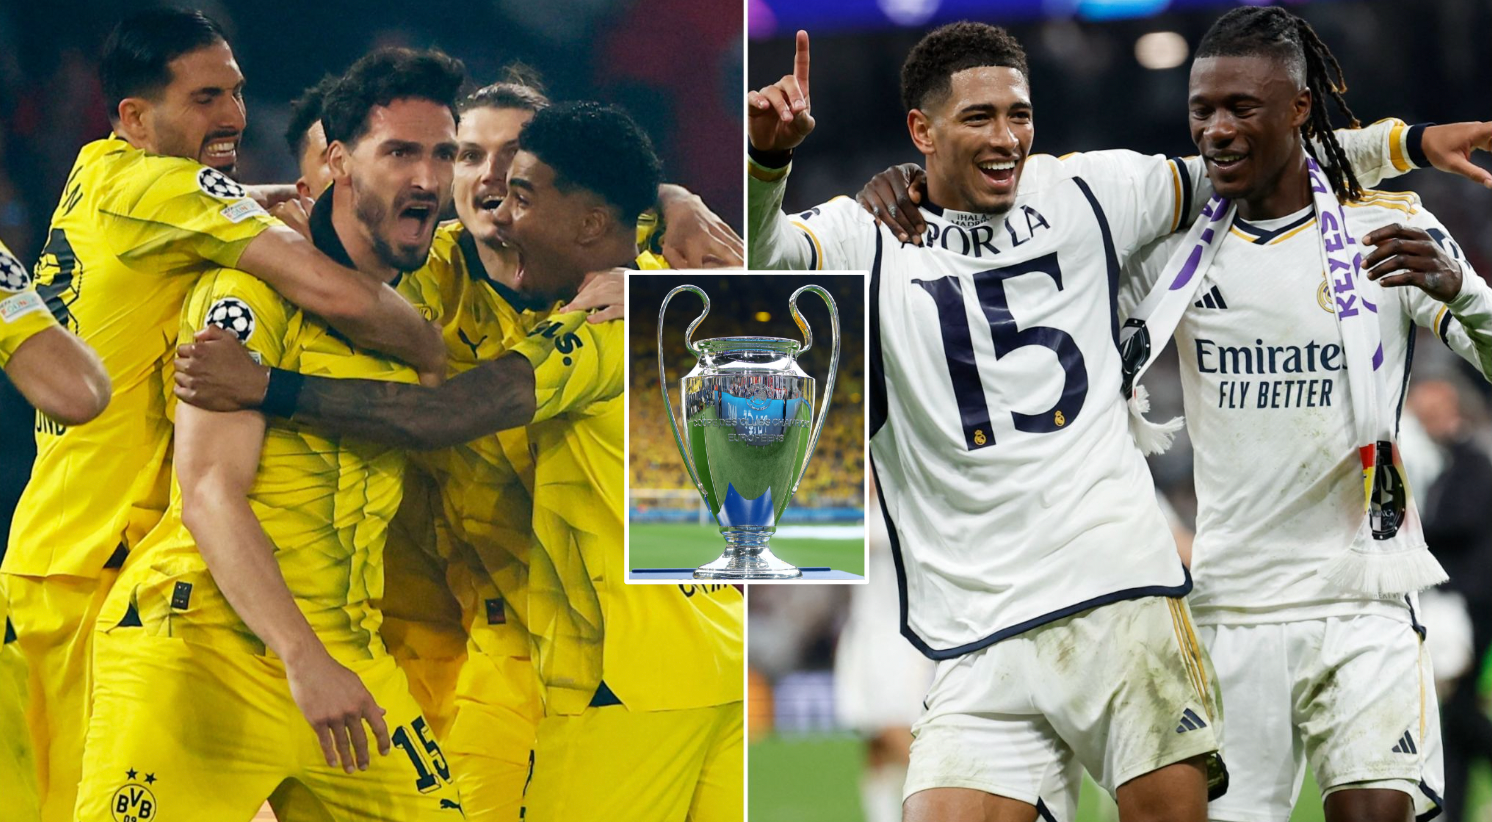 How much money Dortmund or Real Madrid will get for winning the Champions League